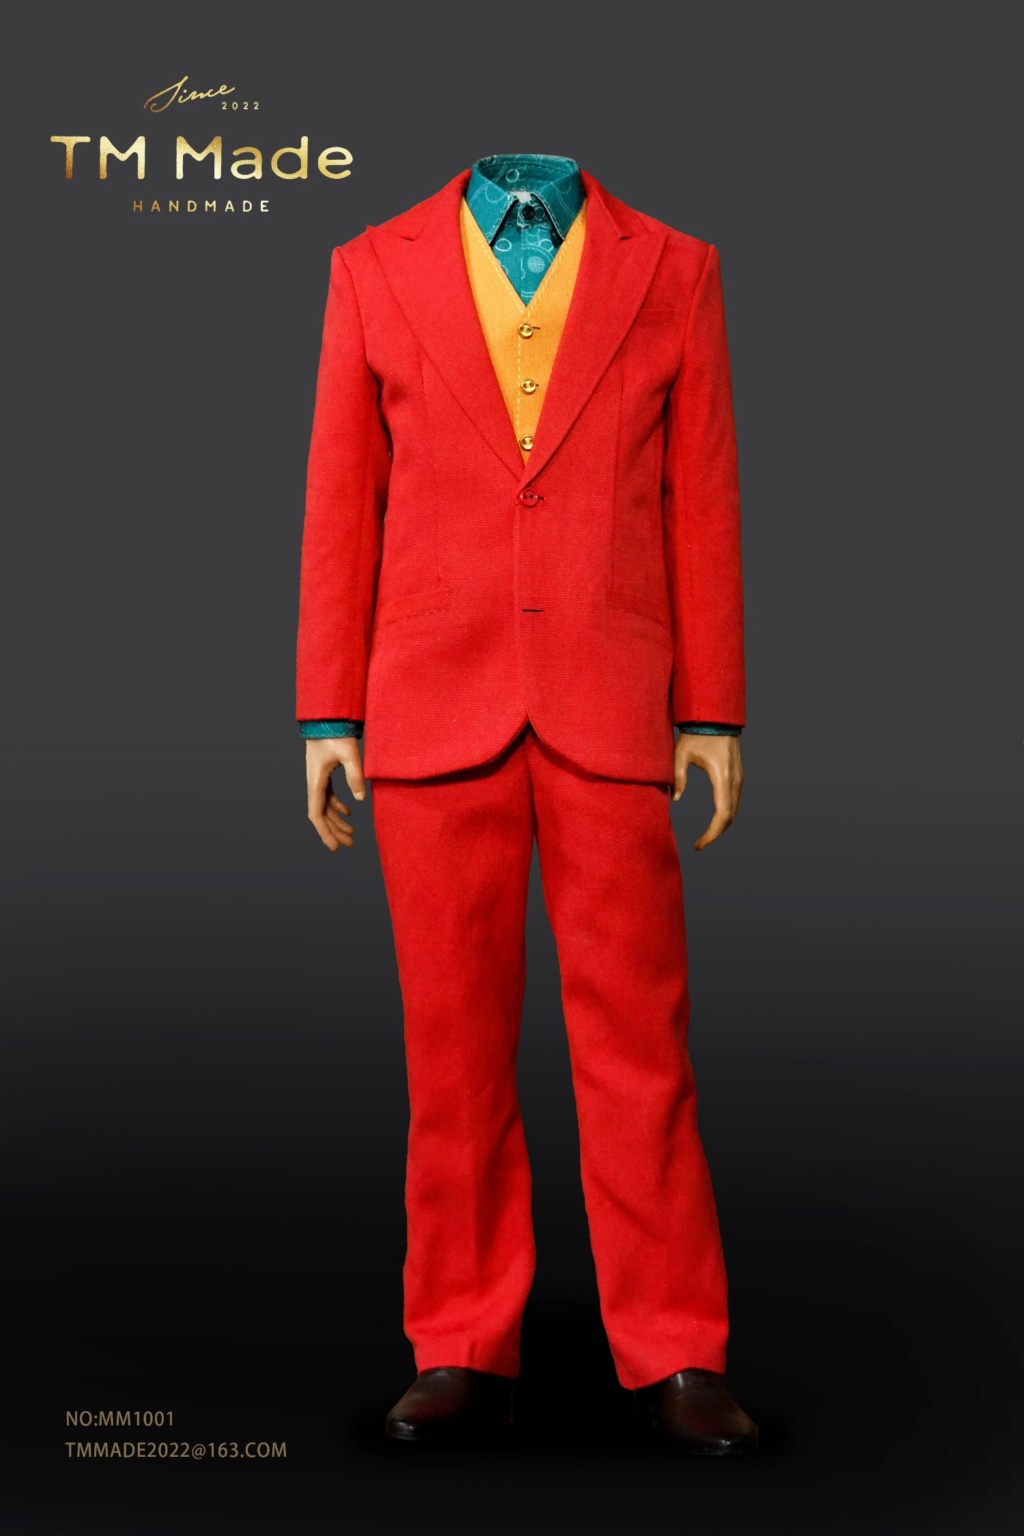 Accessory - NEW PRODUCT: TM MADE MM1001 - 1/6 Scale Red Suit Set (Joker) 12251910